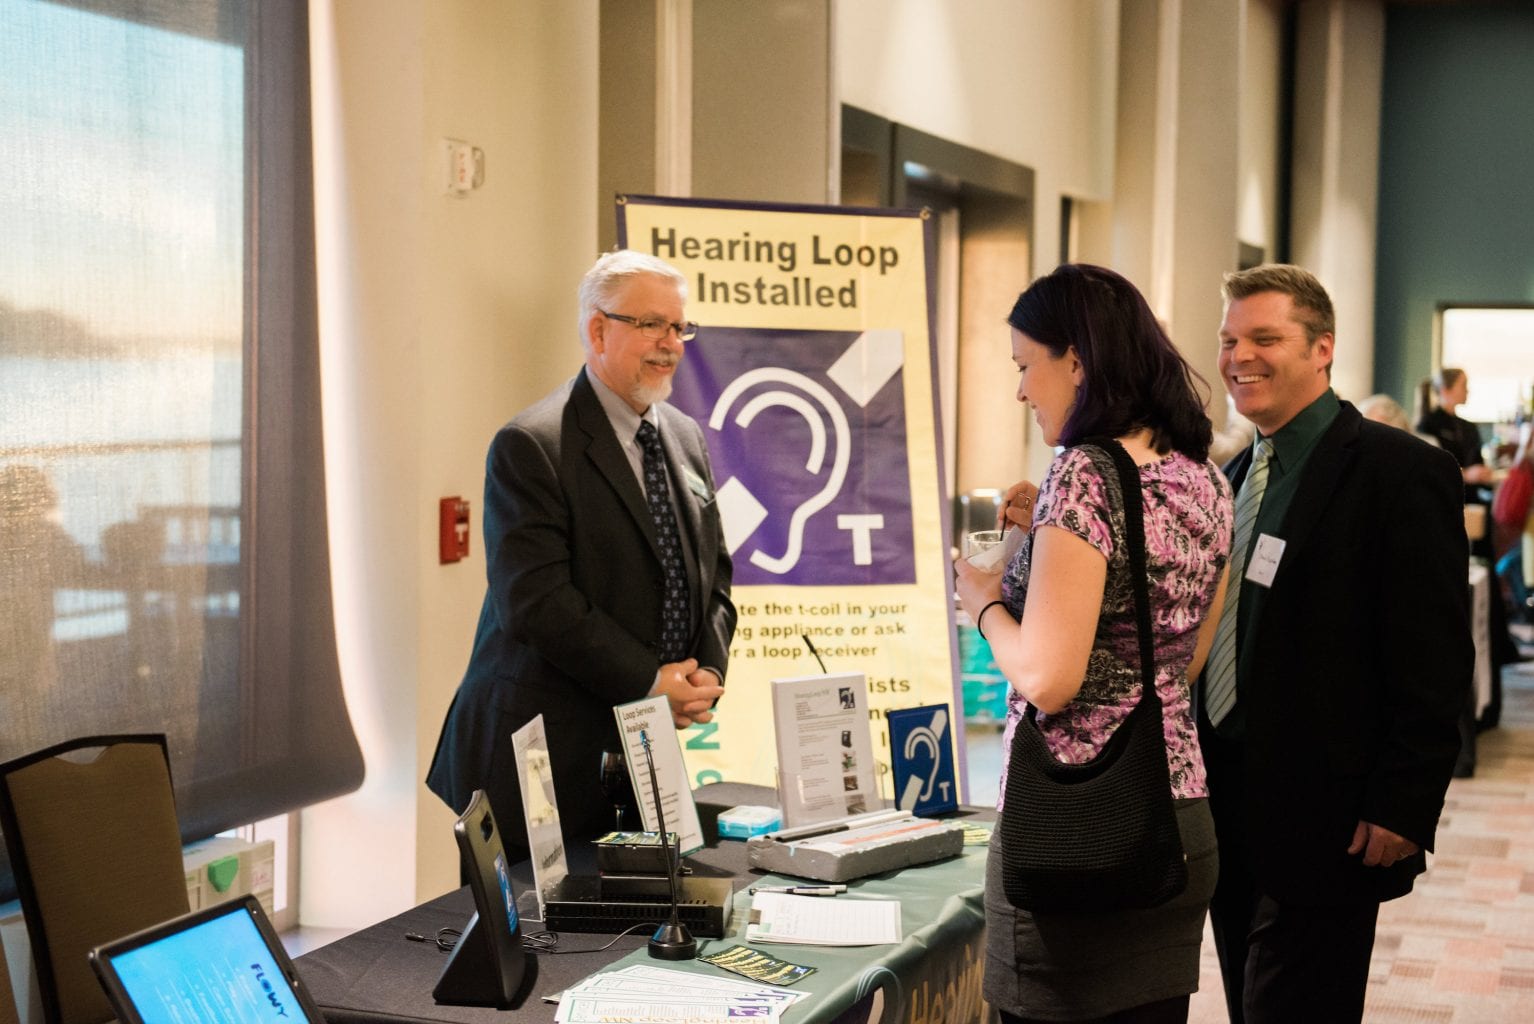 Spencer Norby Tabling promoting installations of hearing loops. 